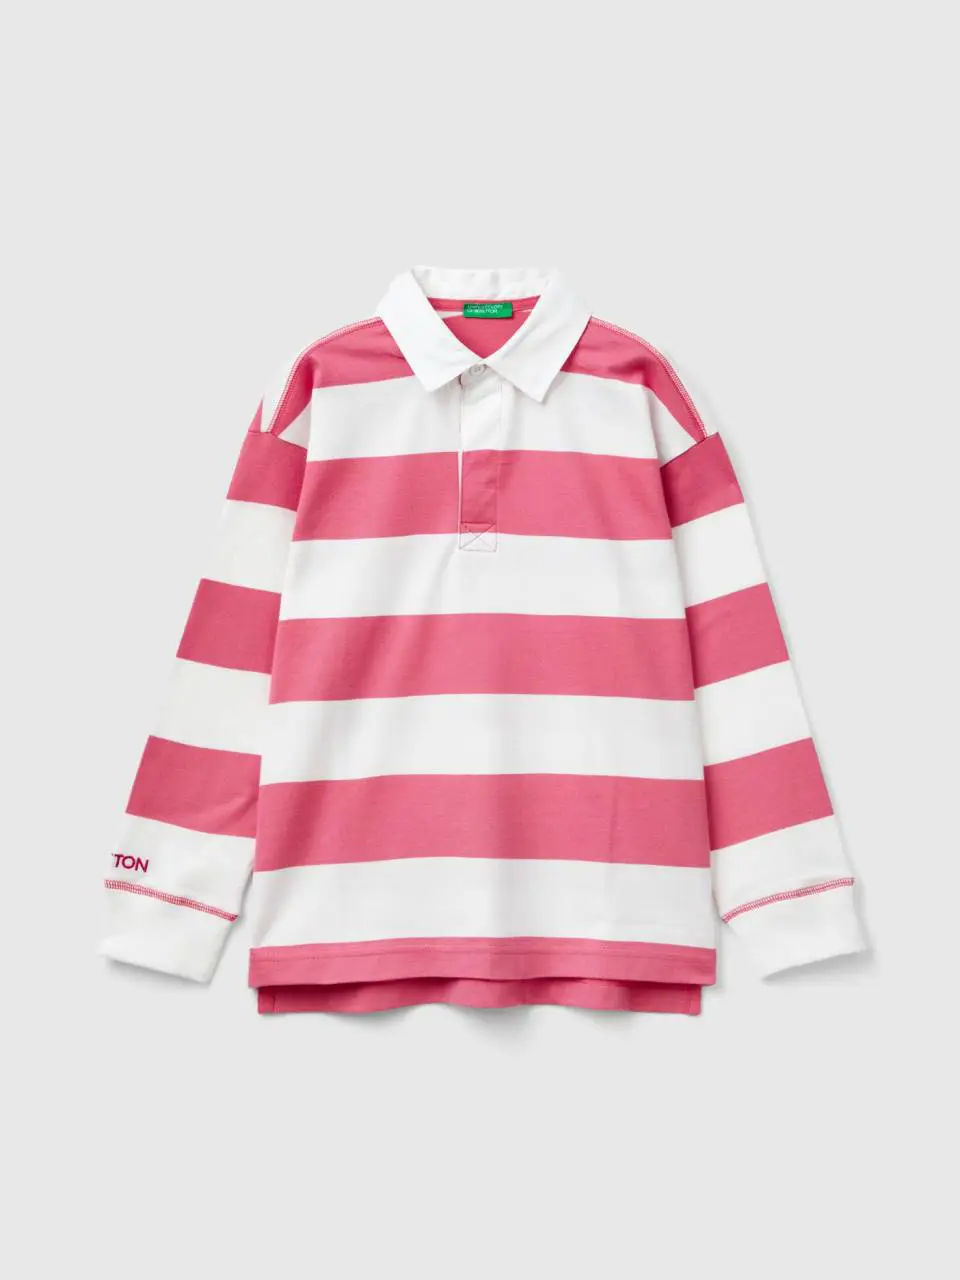 Benetton rugby polo with pink and white stripes. 1